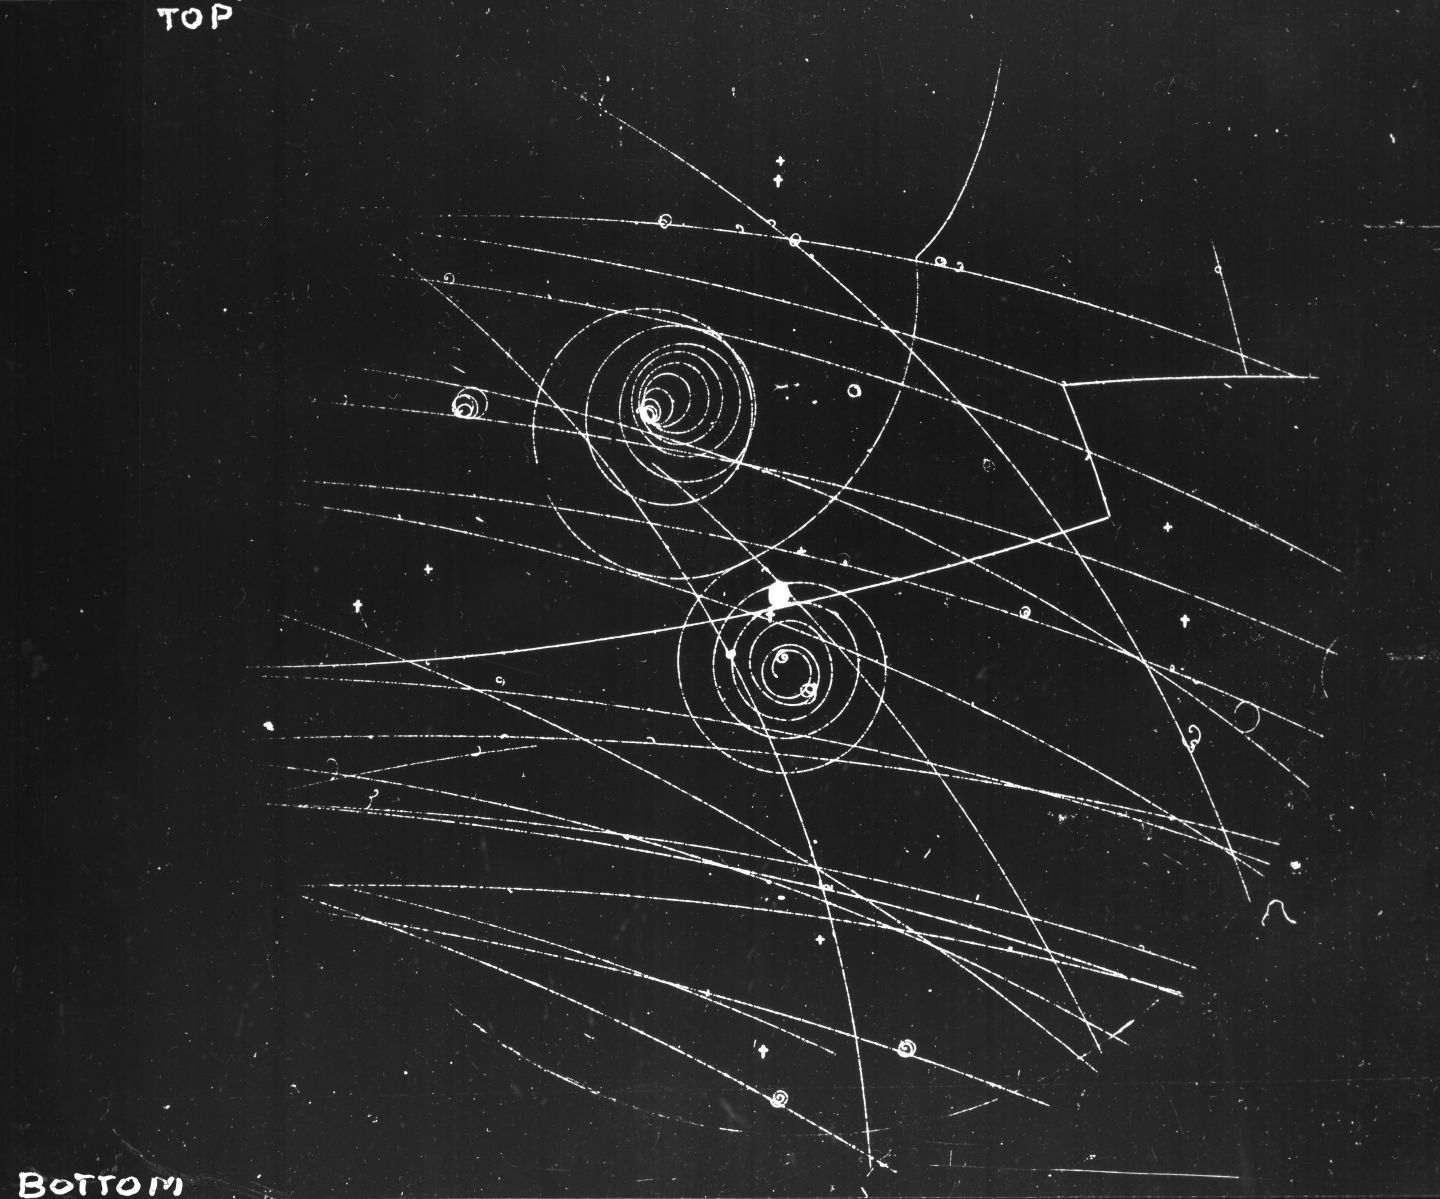 CERN70: Tracing particles